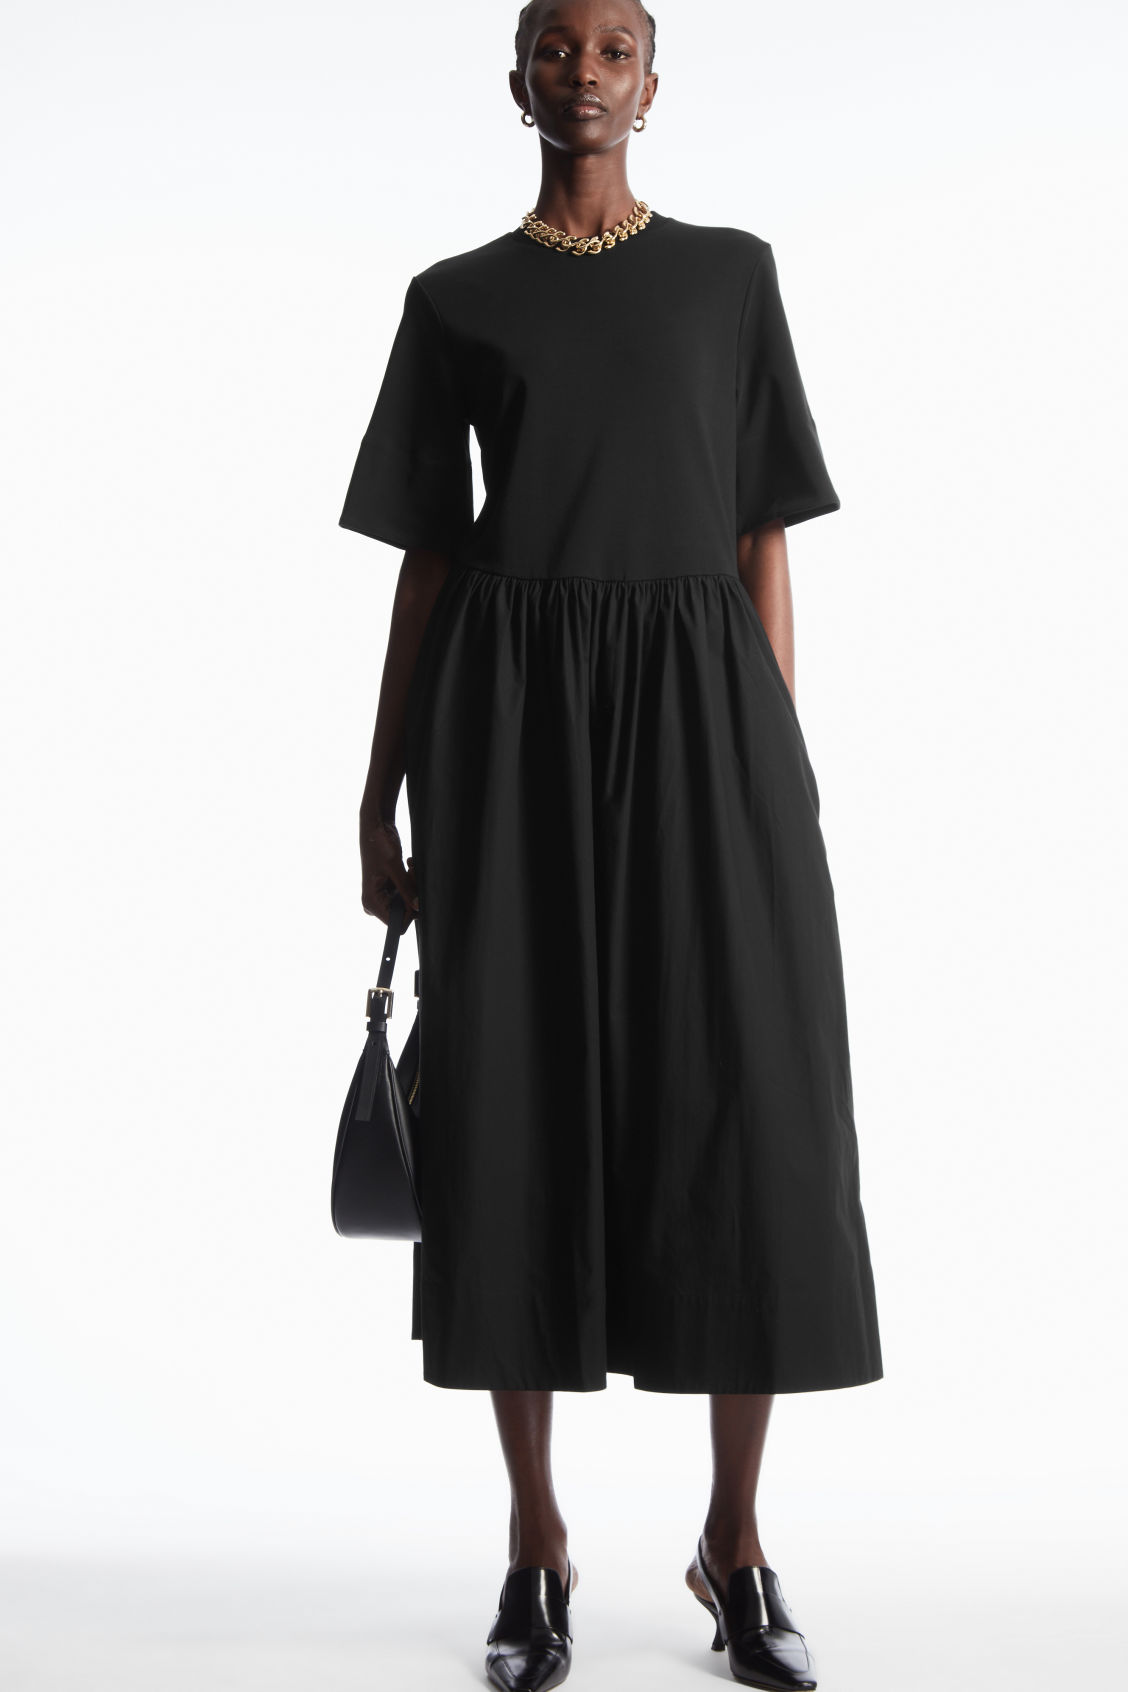 The perfect black day dress